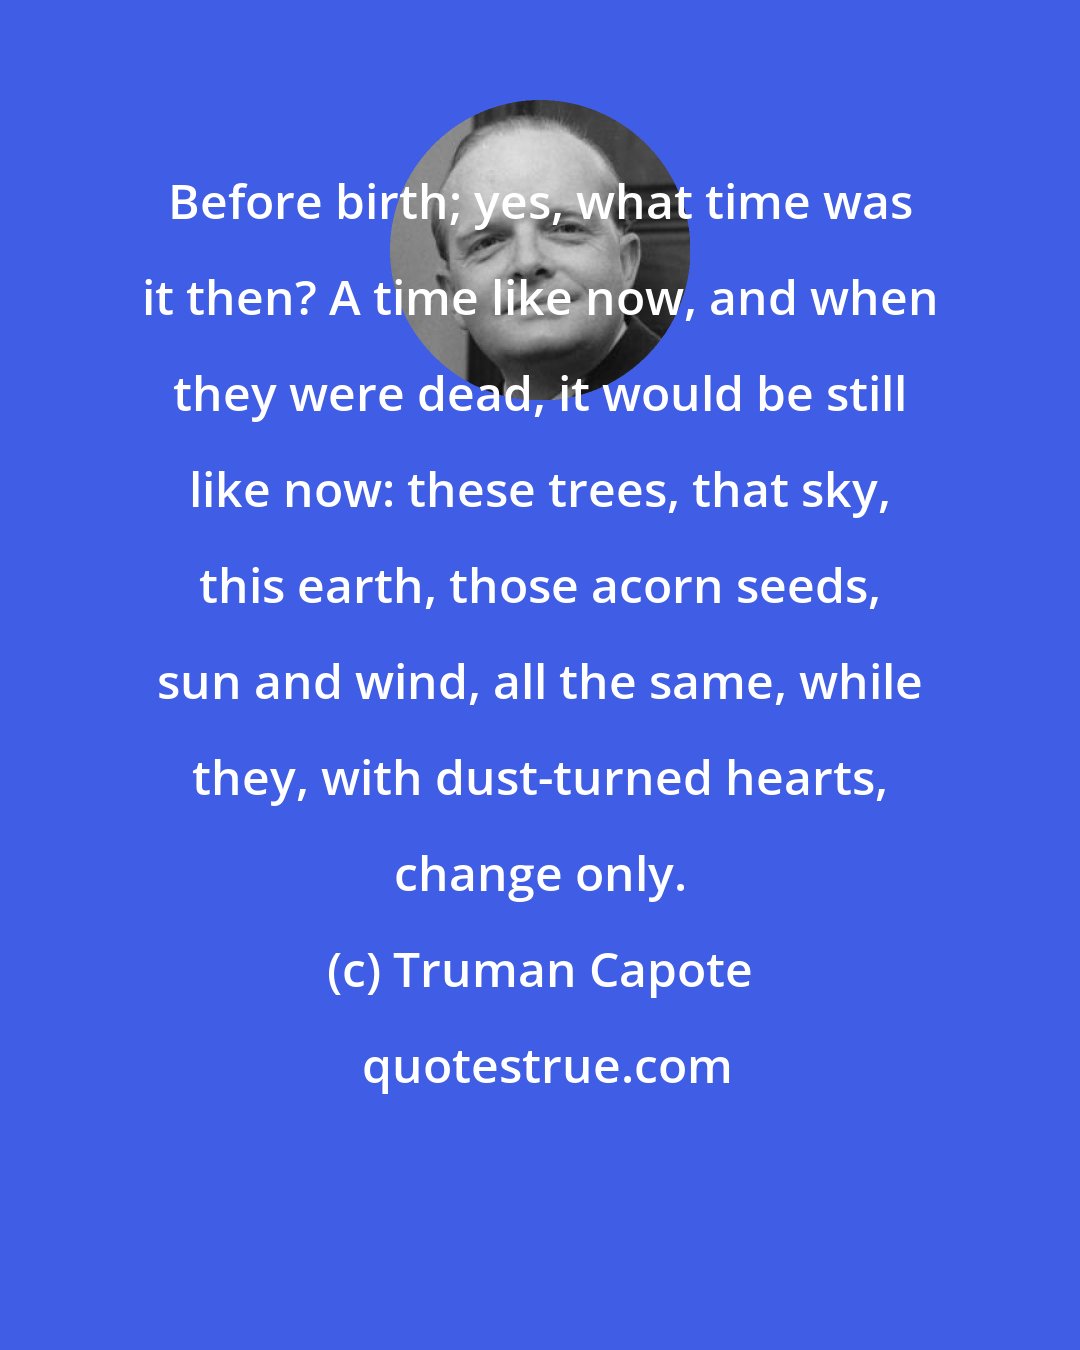 Truman Capote: Before birth; yes, what time was it then? A time like now, and when they were dead, it would be still like now: these trees, that sky, this earth, those acorn seeds, sun and wind, all the same, while they, with dust-turned hearts, change only.